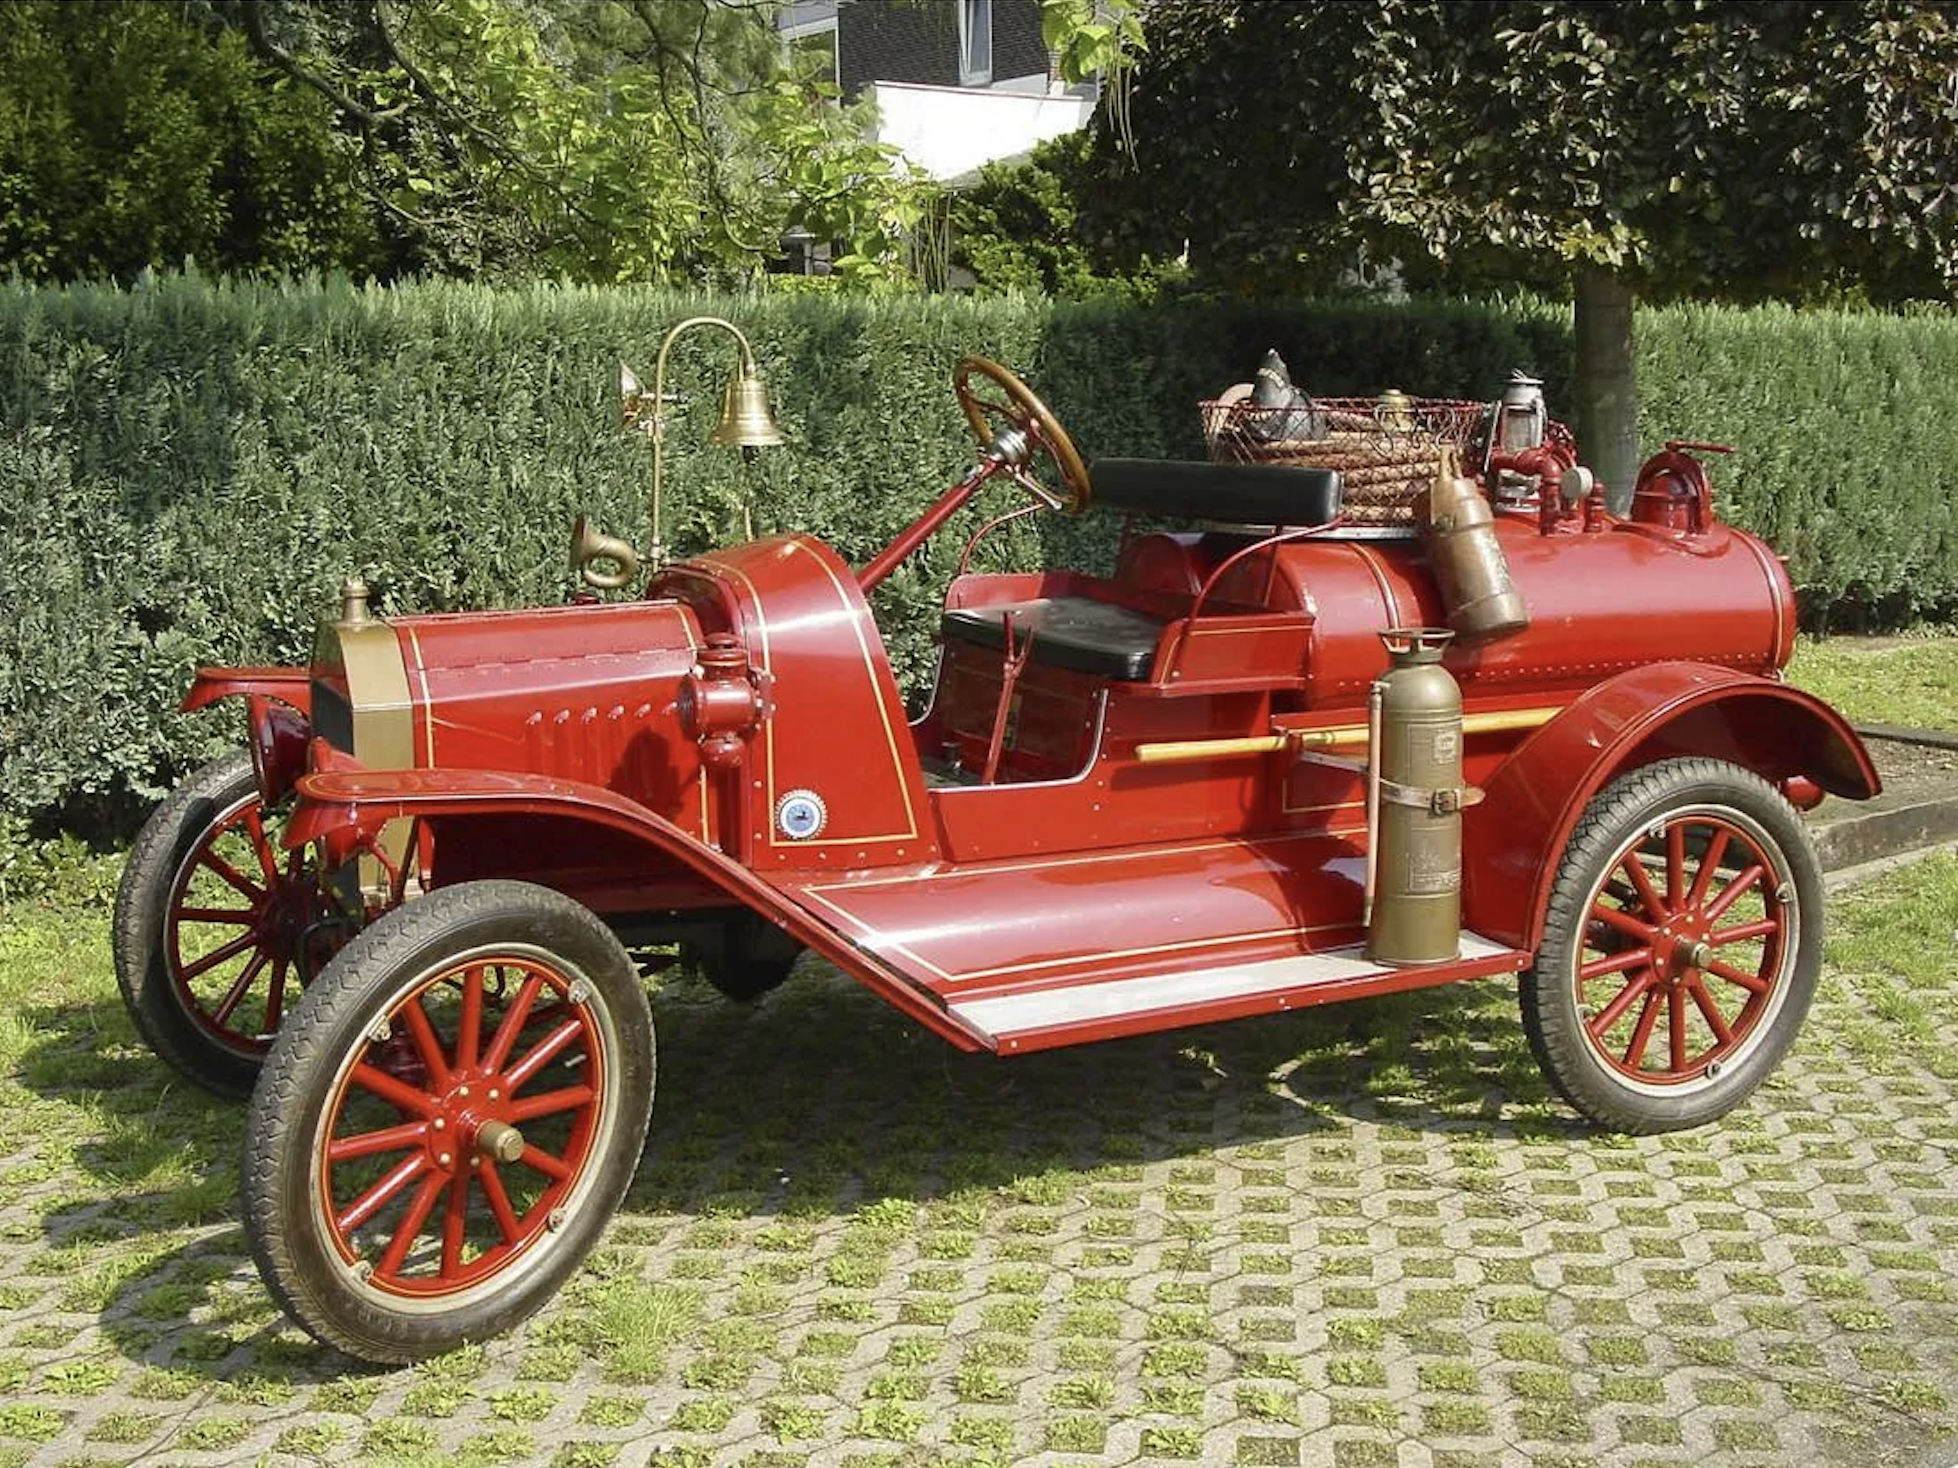 Ford Model T 1917 chemical fire truck, est. €30,000-€50,000